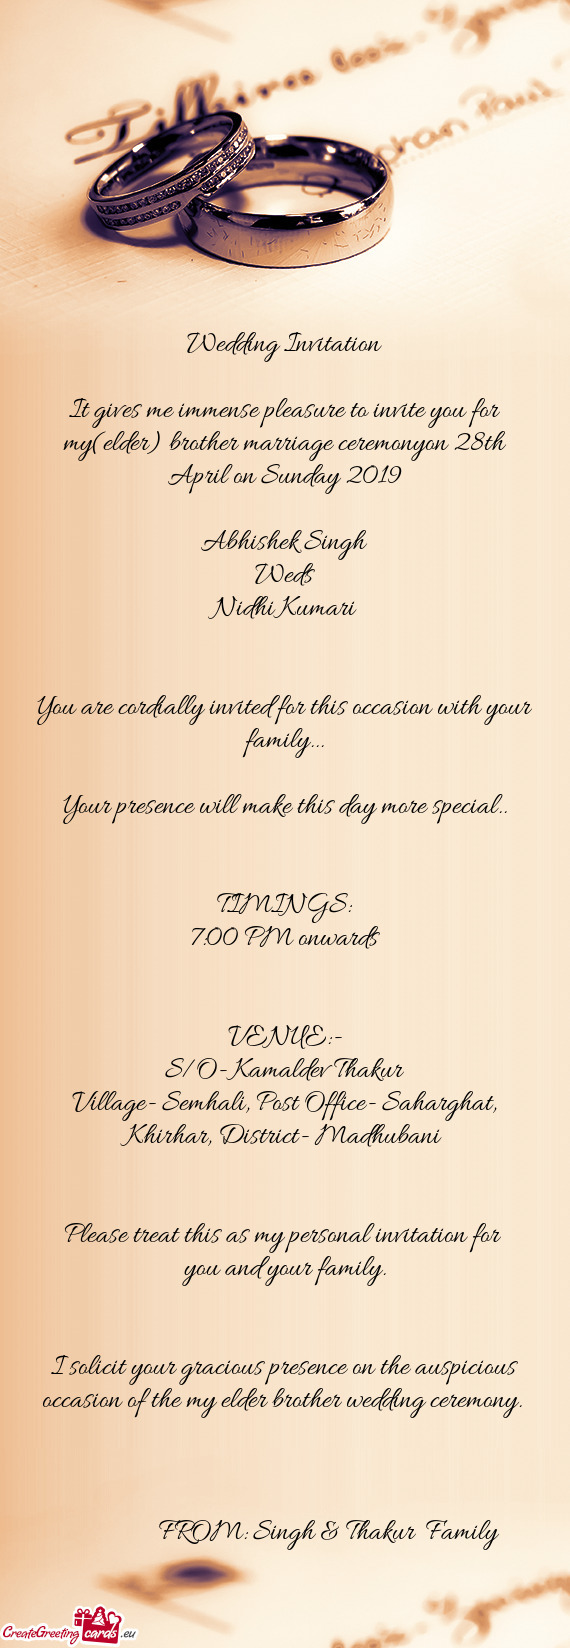 It gives me immense pleasure to invite you for my(elder) brother marriage ceremonyon 28th April on S